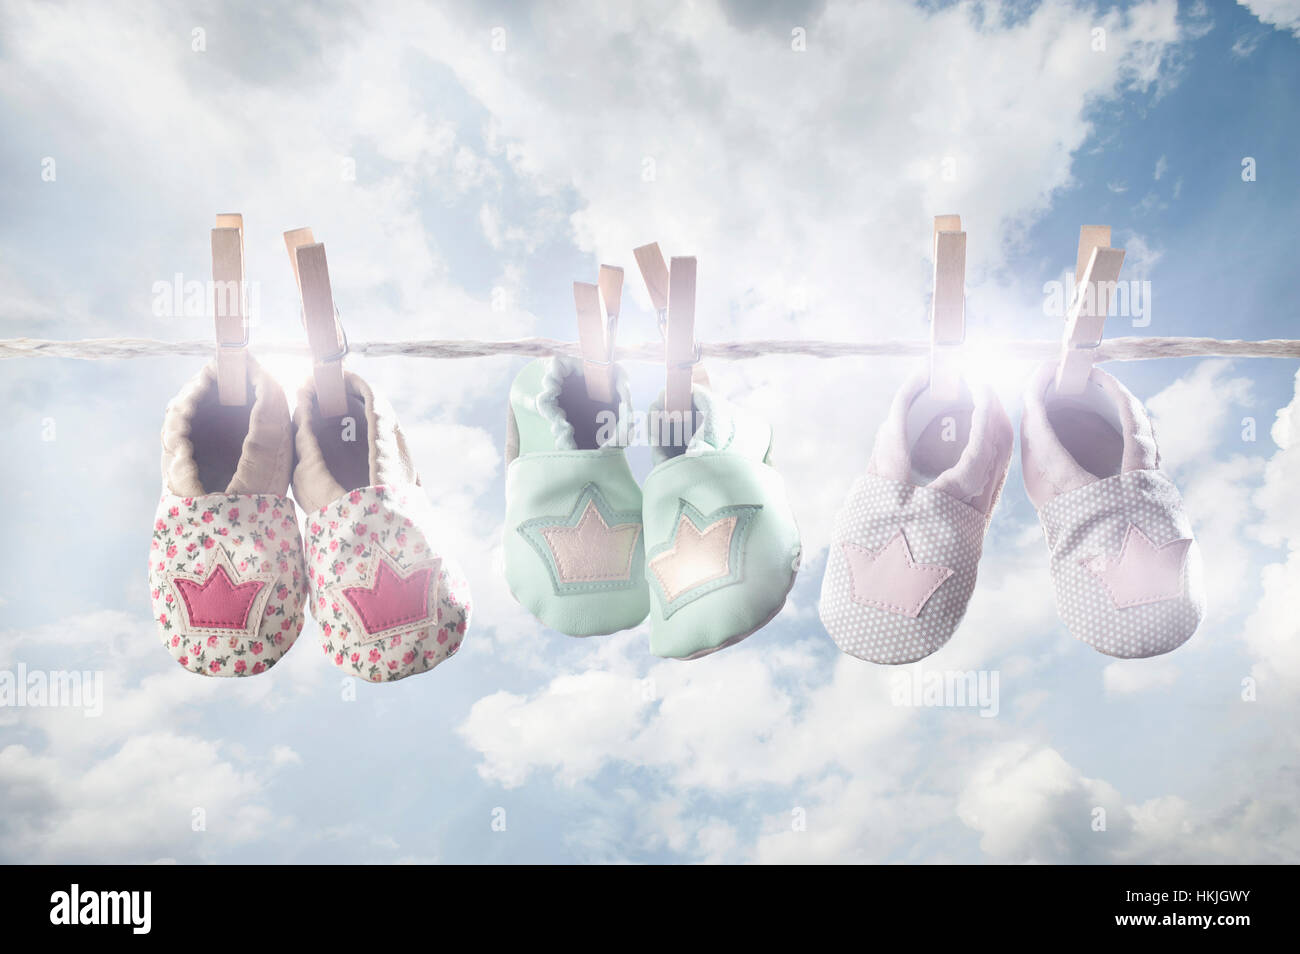 Pair of baby shoes hanging on clothes line, Bavaria, Germany Stock Photo